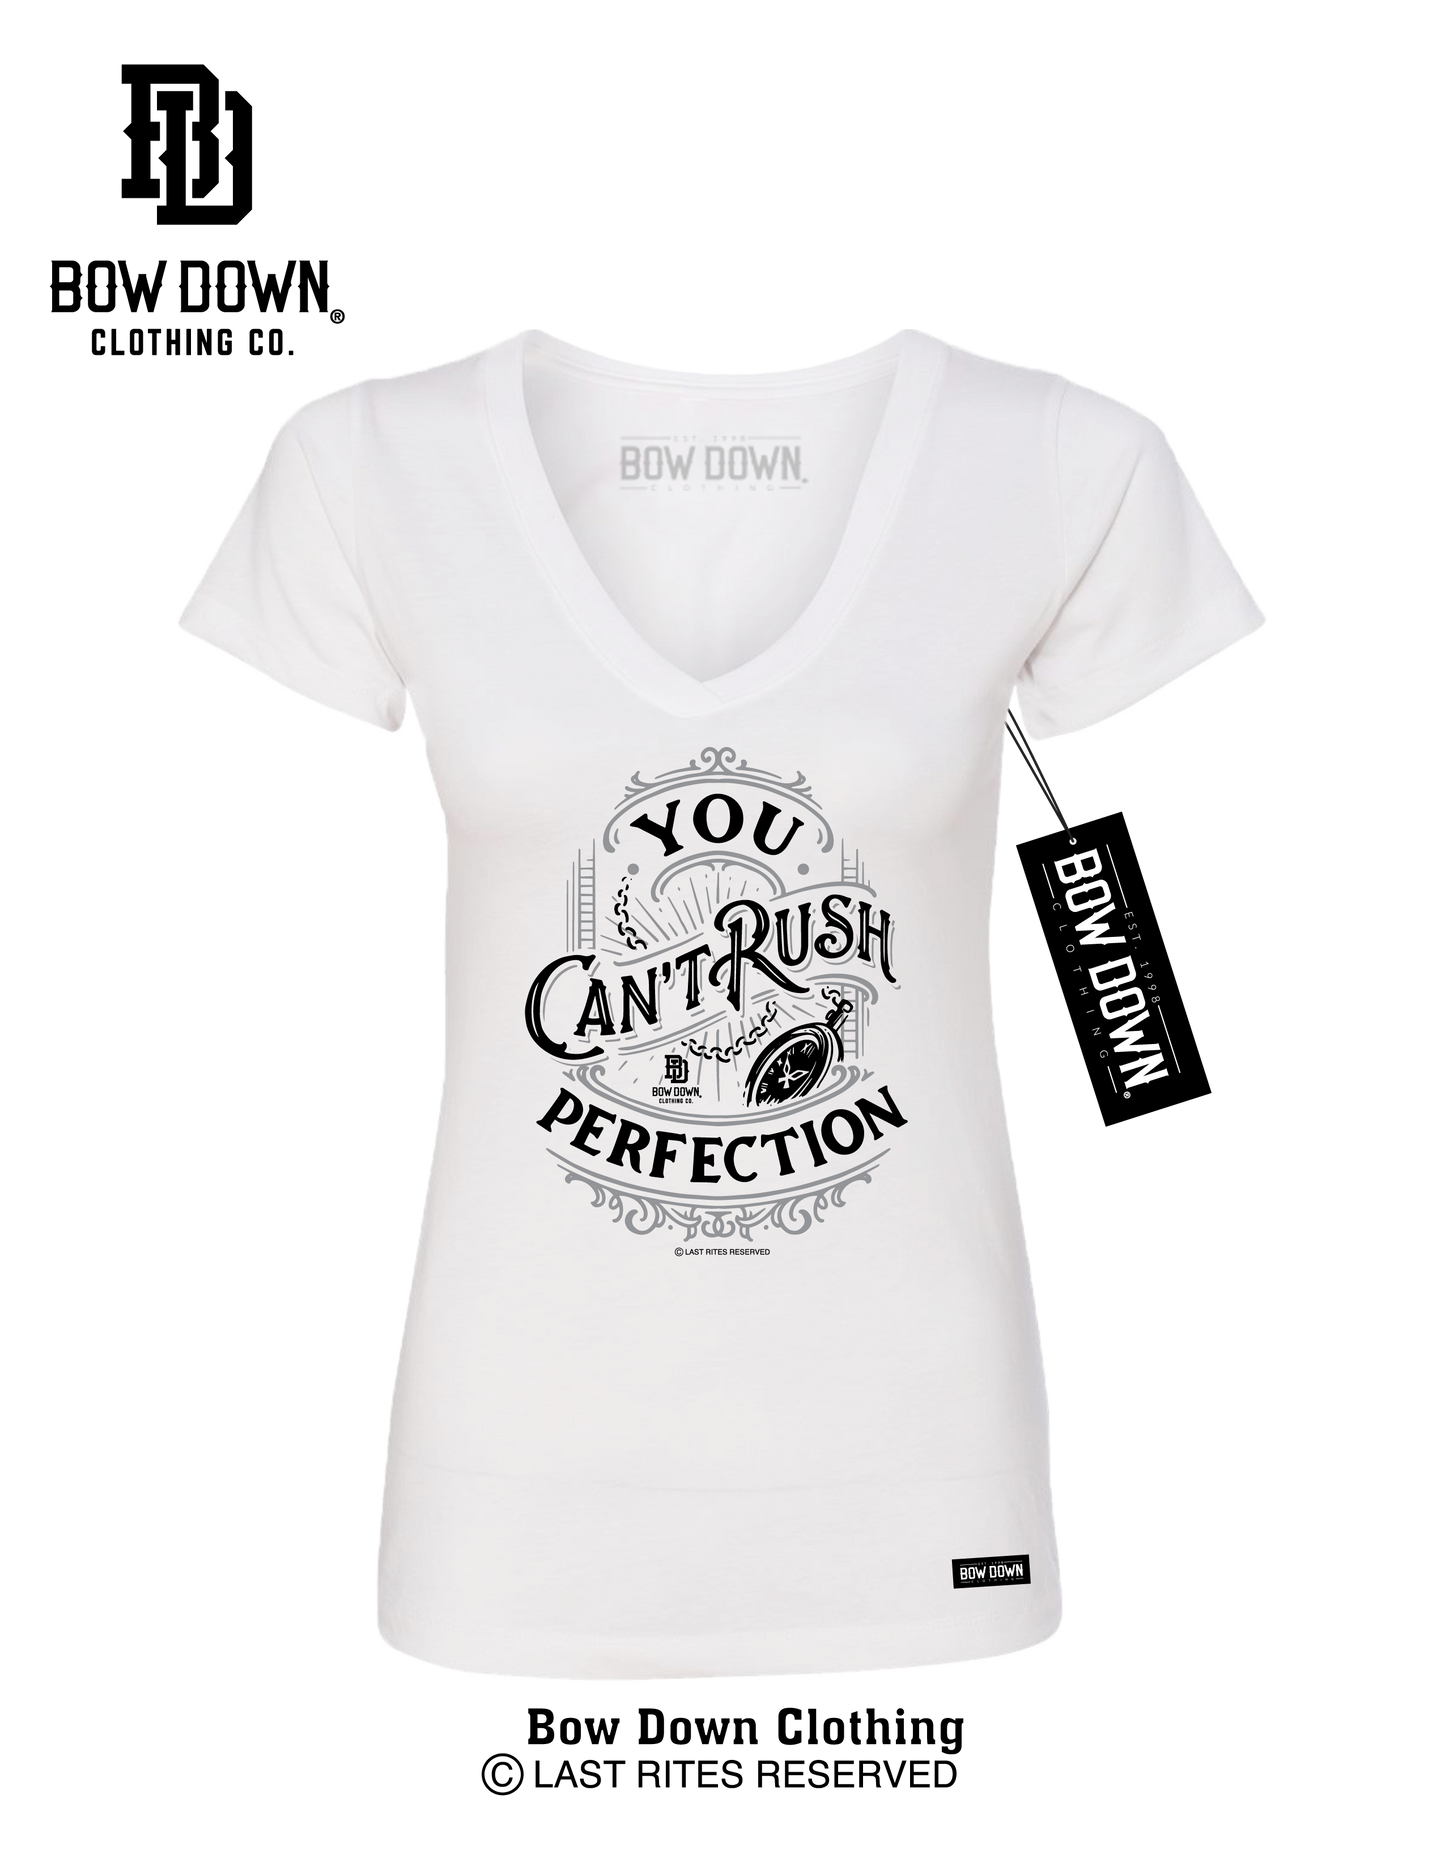 CAN'T RUSH PERFECTION WOMEN'S V-NECK